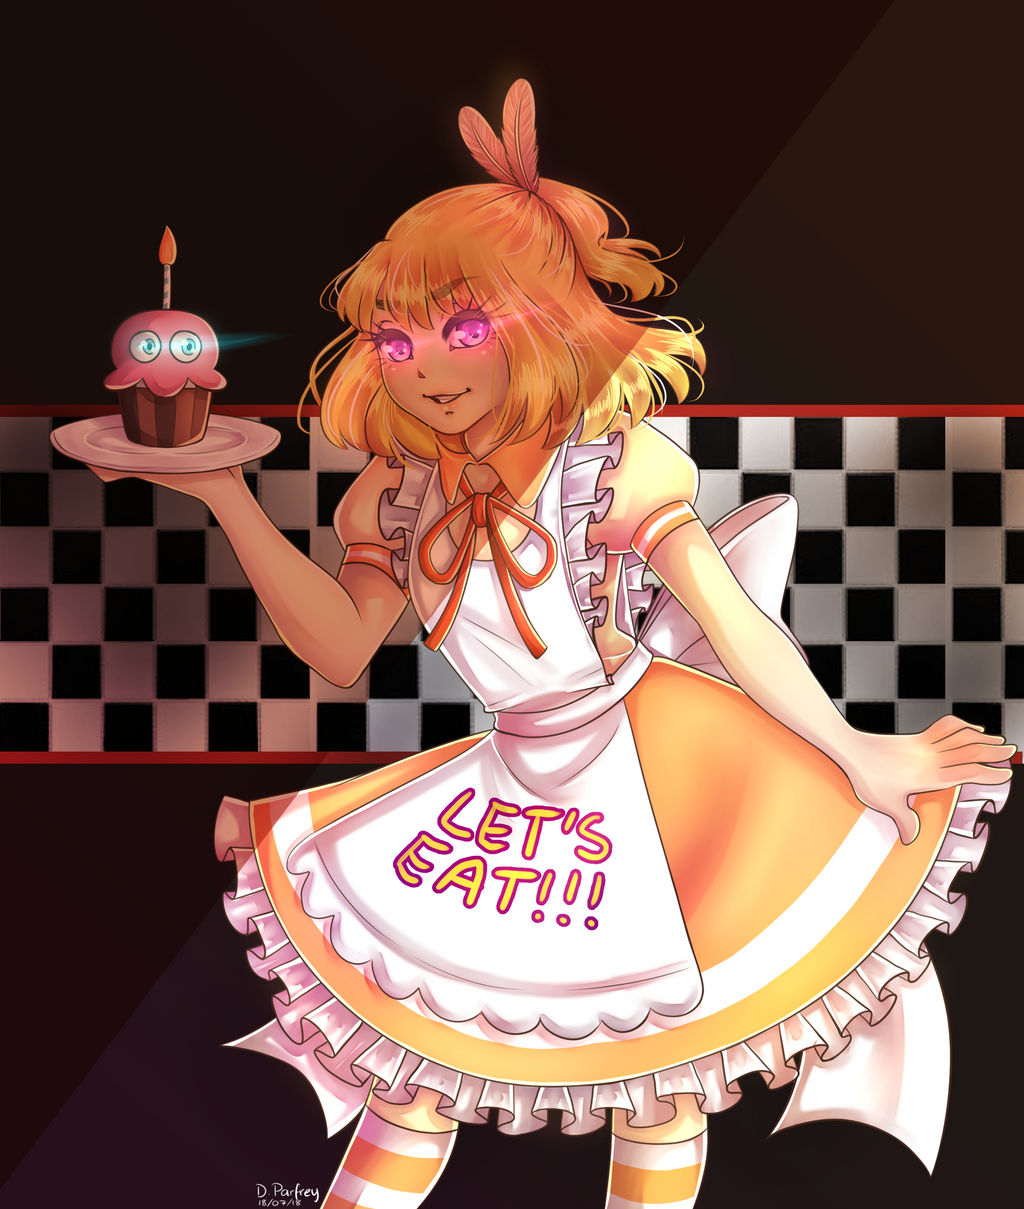 Human Anime Chica (FNAF 1) by starbunny196 on DeviantArt